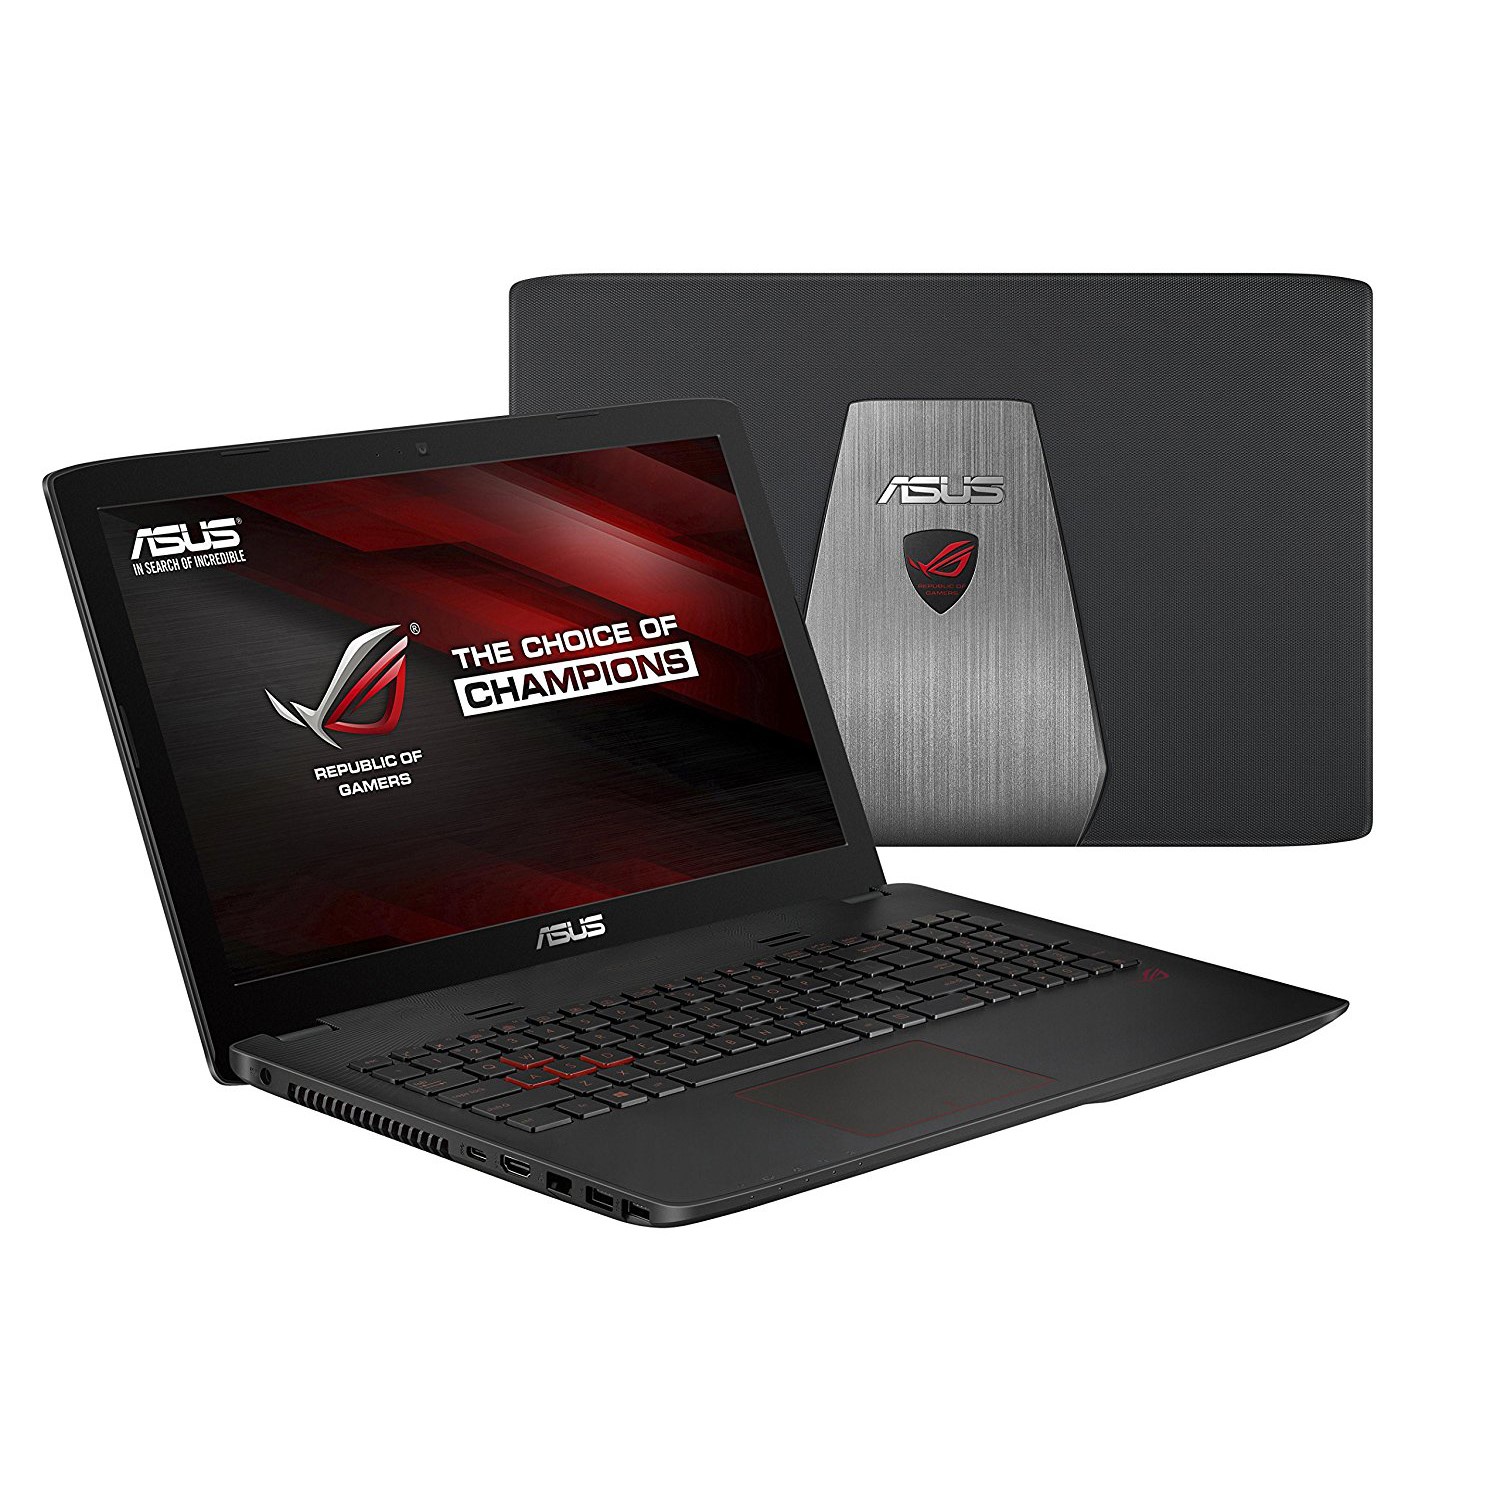 Asus Rog Gl552vw Core I5 6300hq 8gb 1tb 128gb Ssd Geforce Gtx 960m Dvd Rw 15 6 Inch Windows 10 Gaming Laptop Includes Bag Mouse Headset Laptops Direct